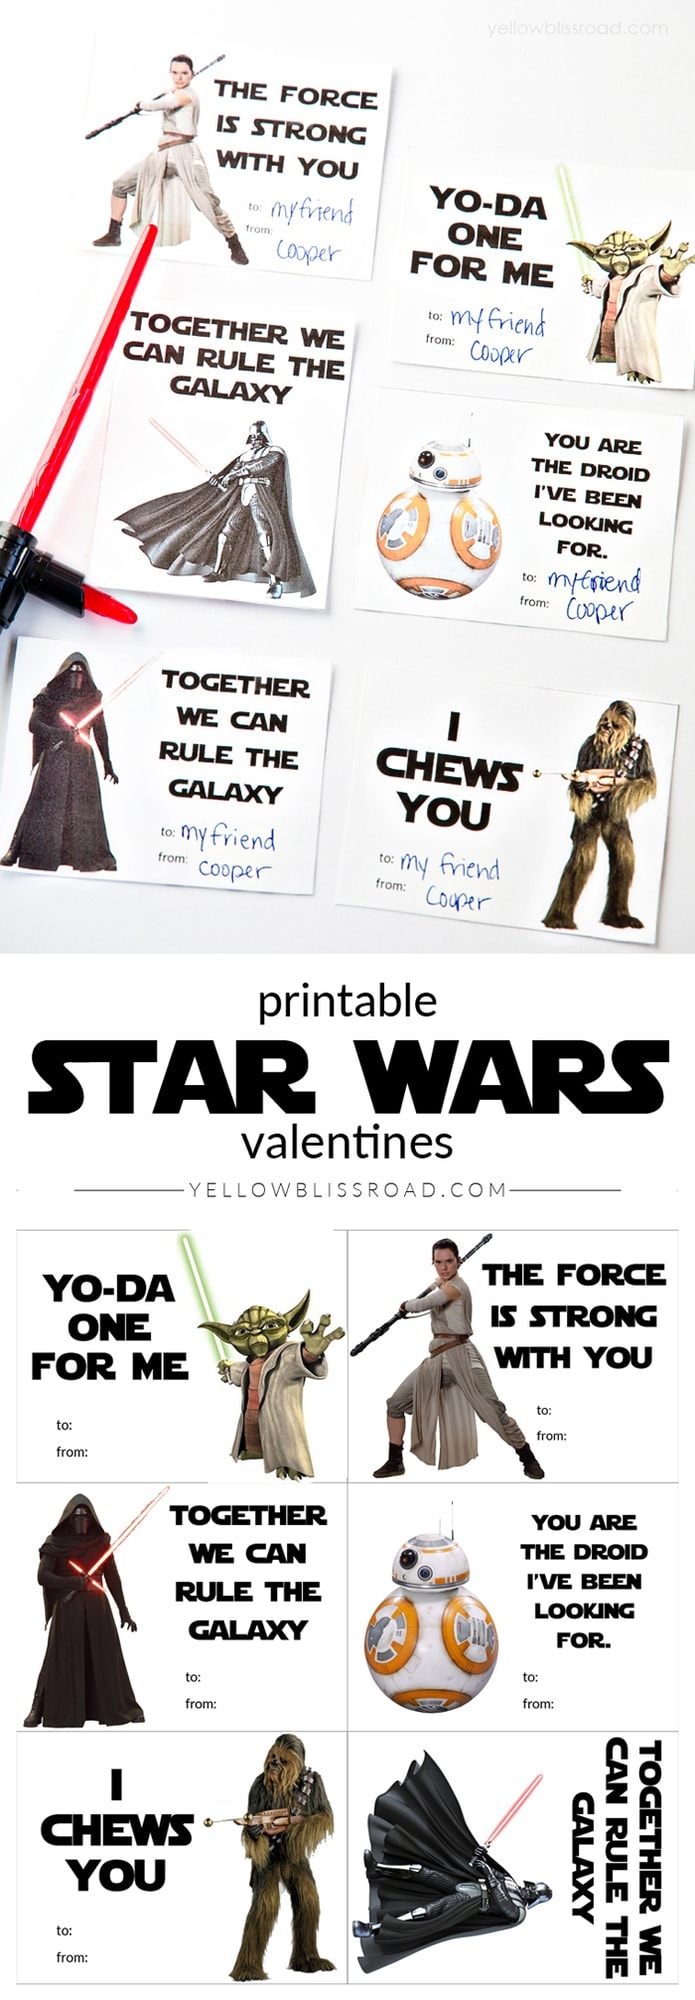 Printable Star Wars Valentines with New and Classic Characters